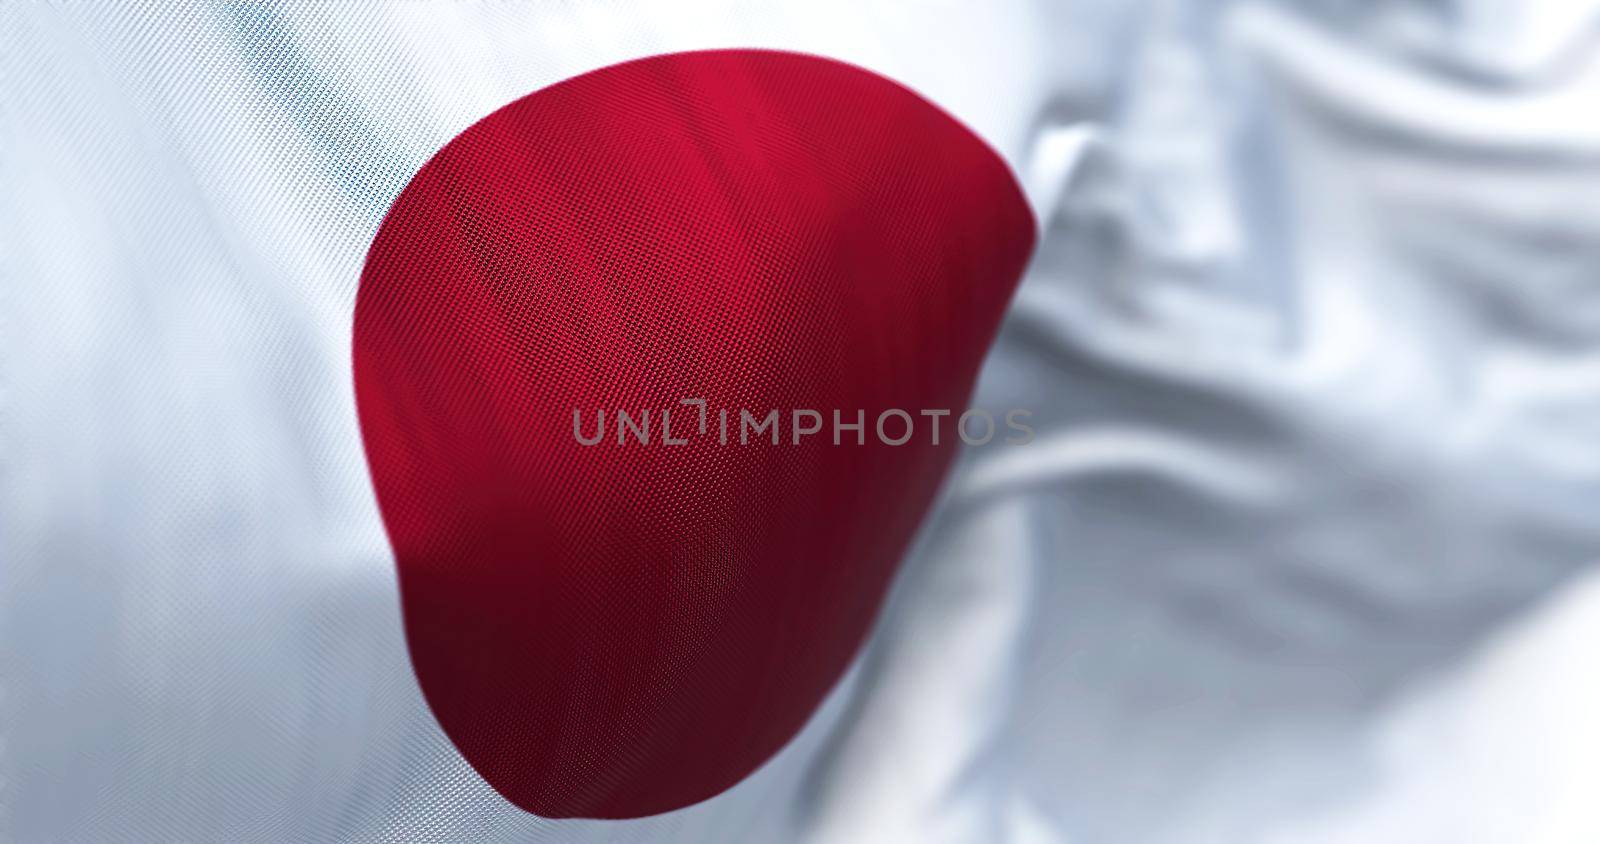 Close-up view of the Japanese national flag waving in the wind. Japan is an Asian country. Fabric background